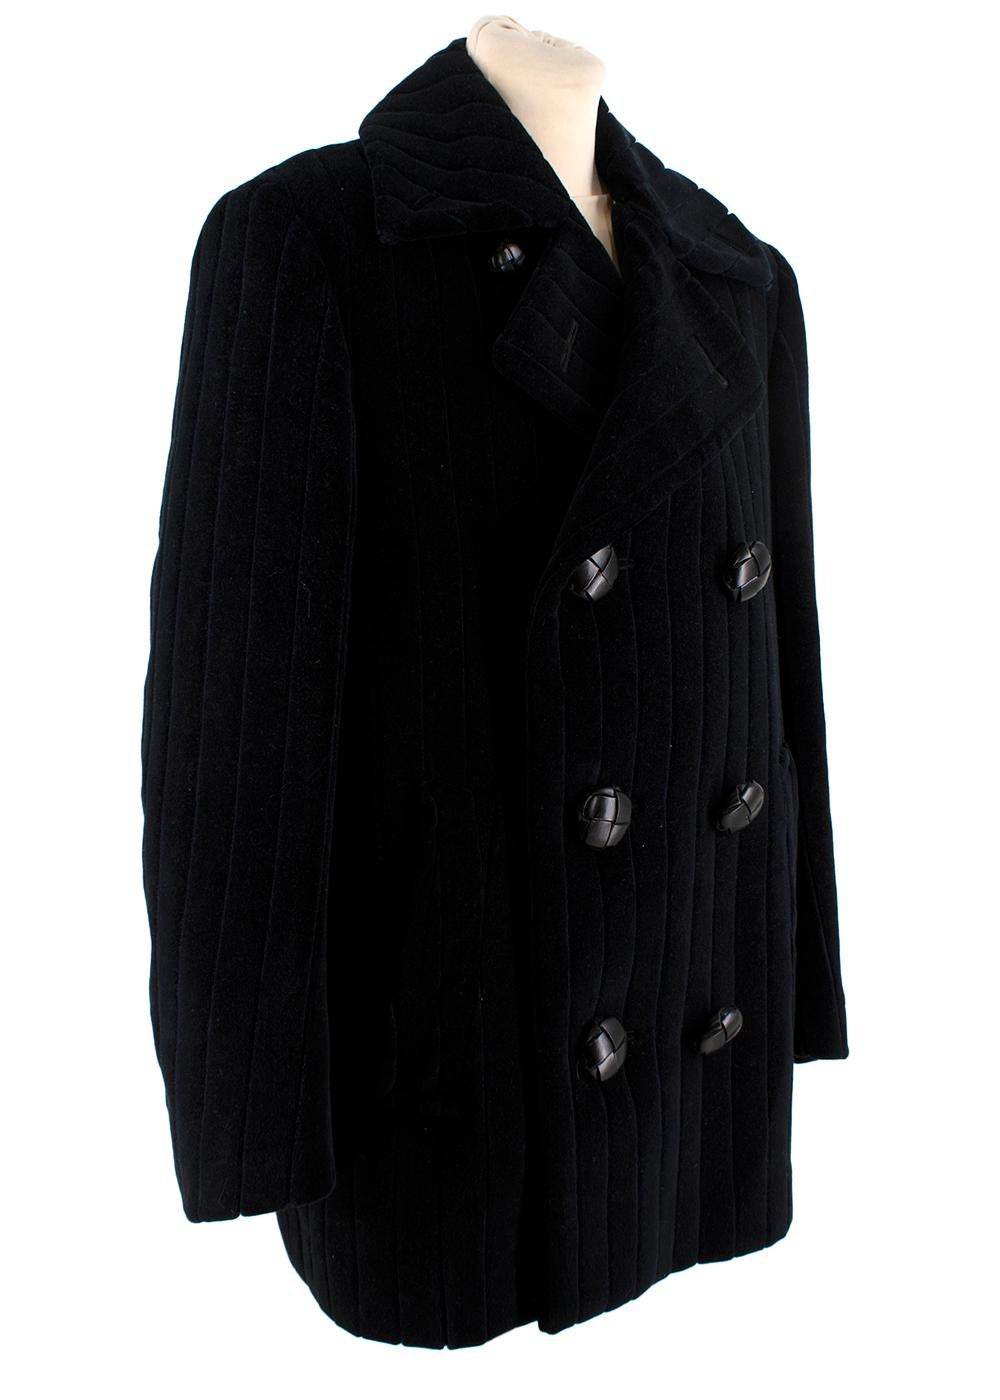 Raf Simons Navy Quilted Velvet Pea Coat

- Long sleeve quilted cotton velvet coat 
- Notched lapel collar and double-breasted button closure at front
- Welt pockets at waist
- Black leather buttons 
- Boxy cut, with a structured shoulder
- Fully